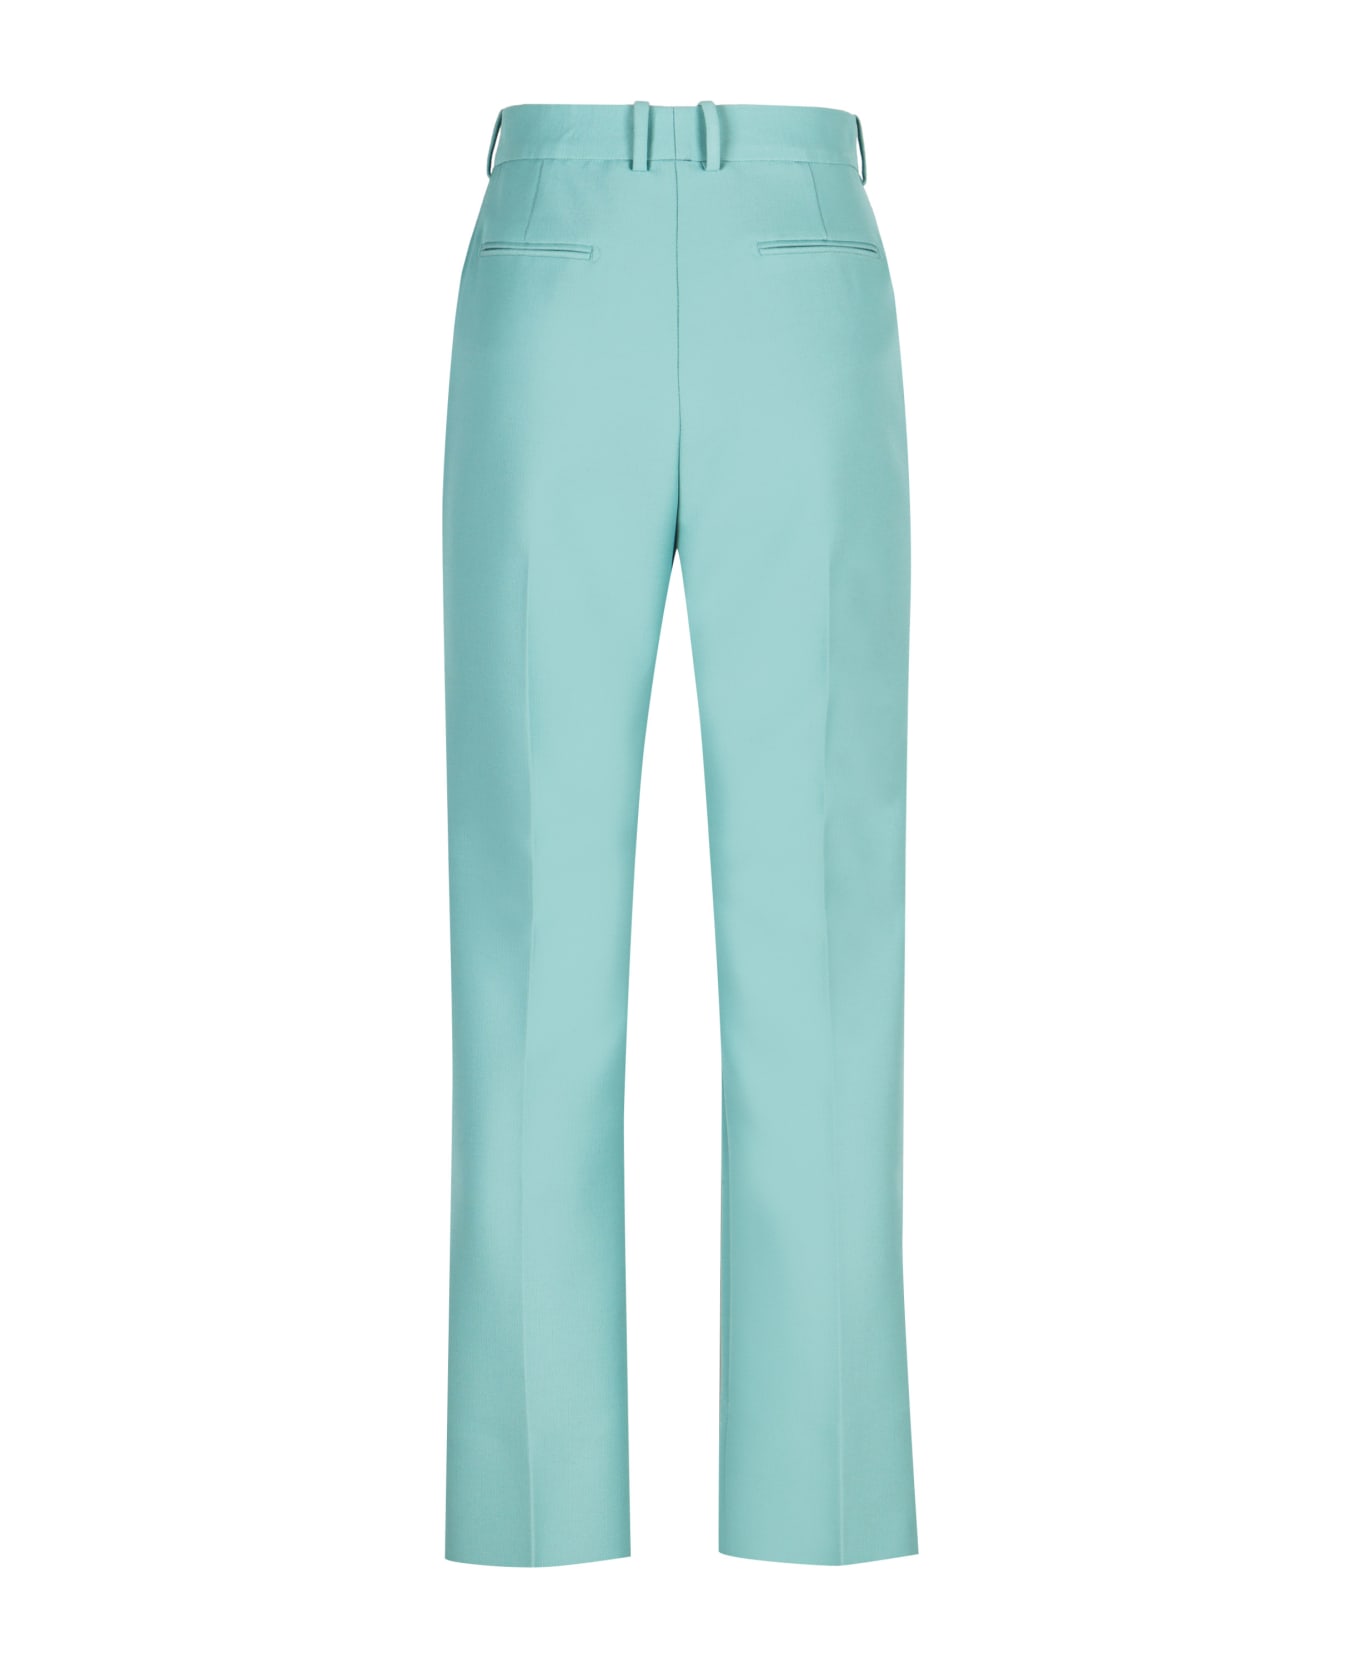 Tom Ford Wool Blend Trousers - BLUE